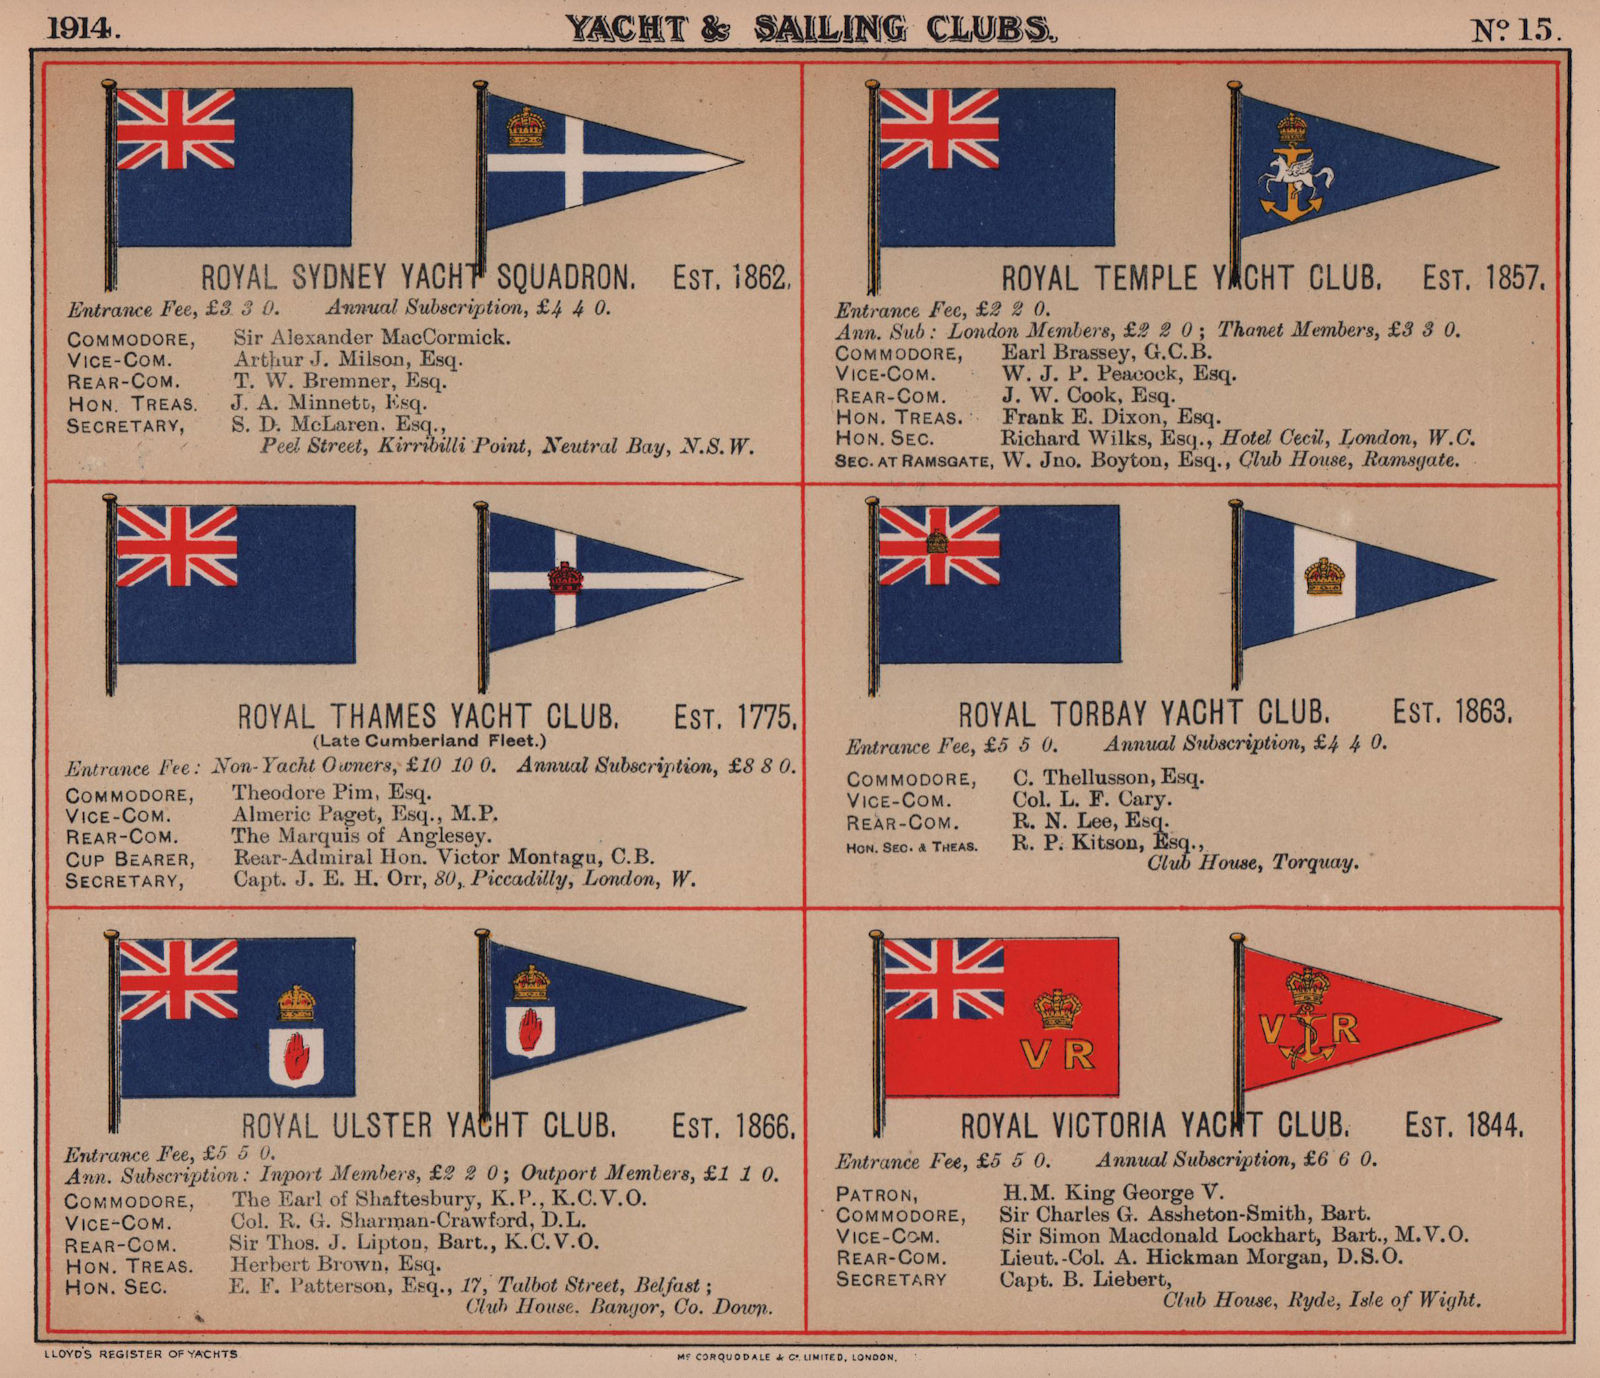 ROYAL YACHT & SAILING CLUB FLAGS S-V Sydney Temple Thames Ulster Victoria 1914